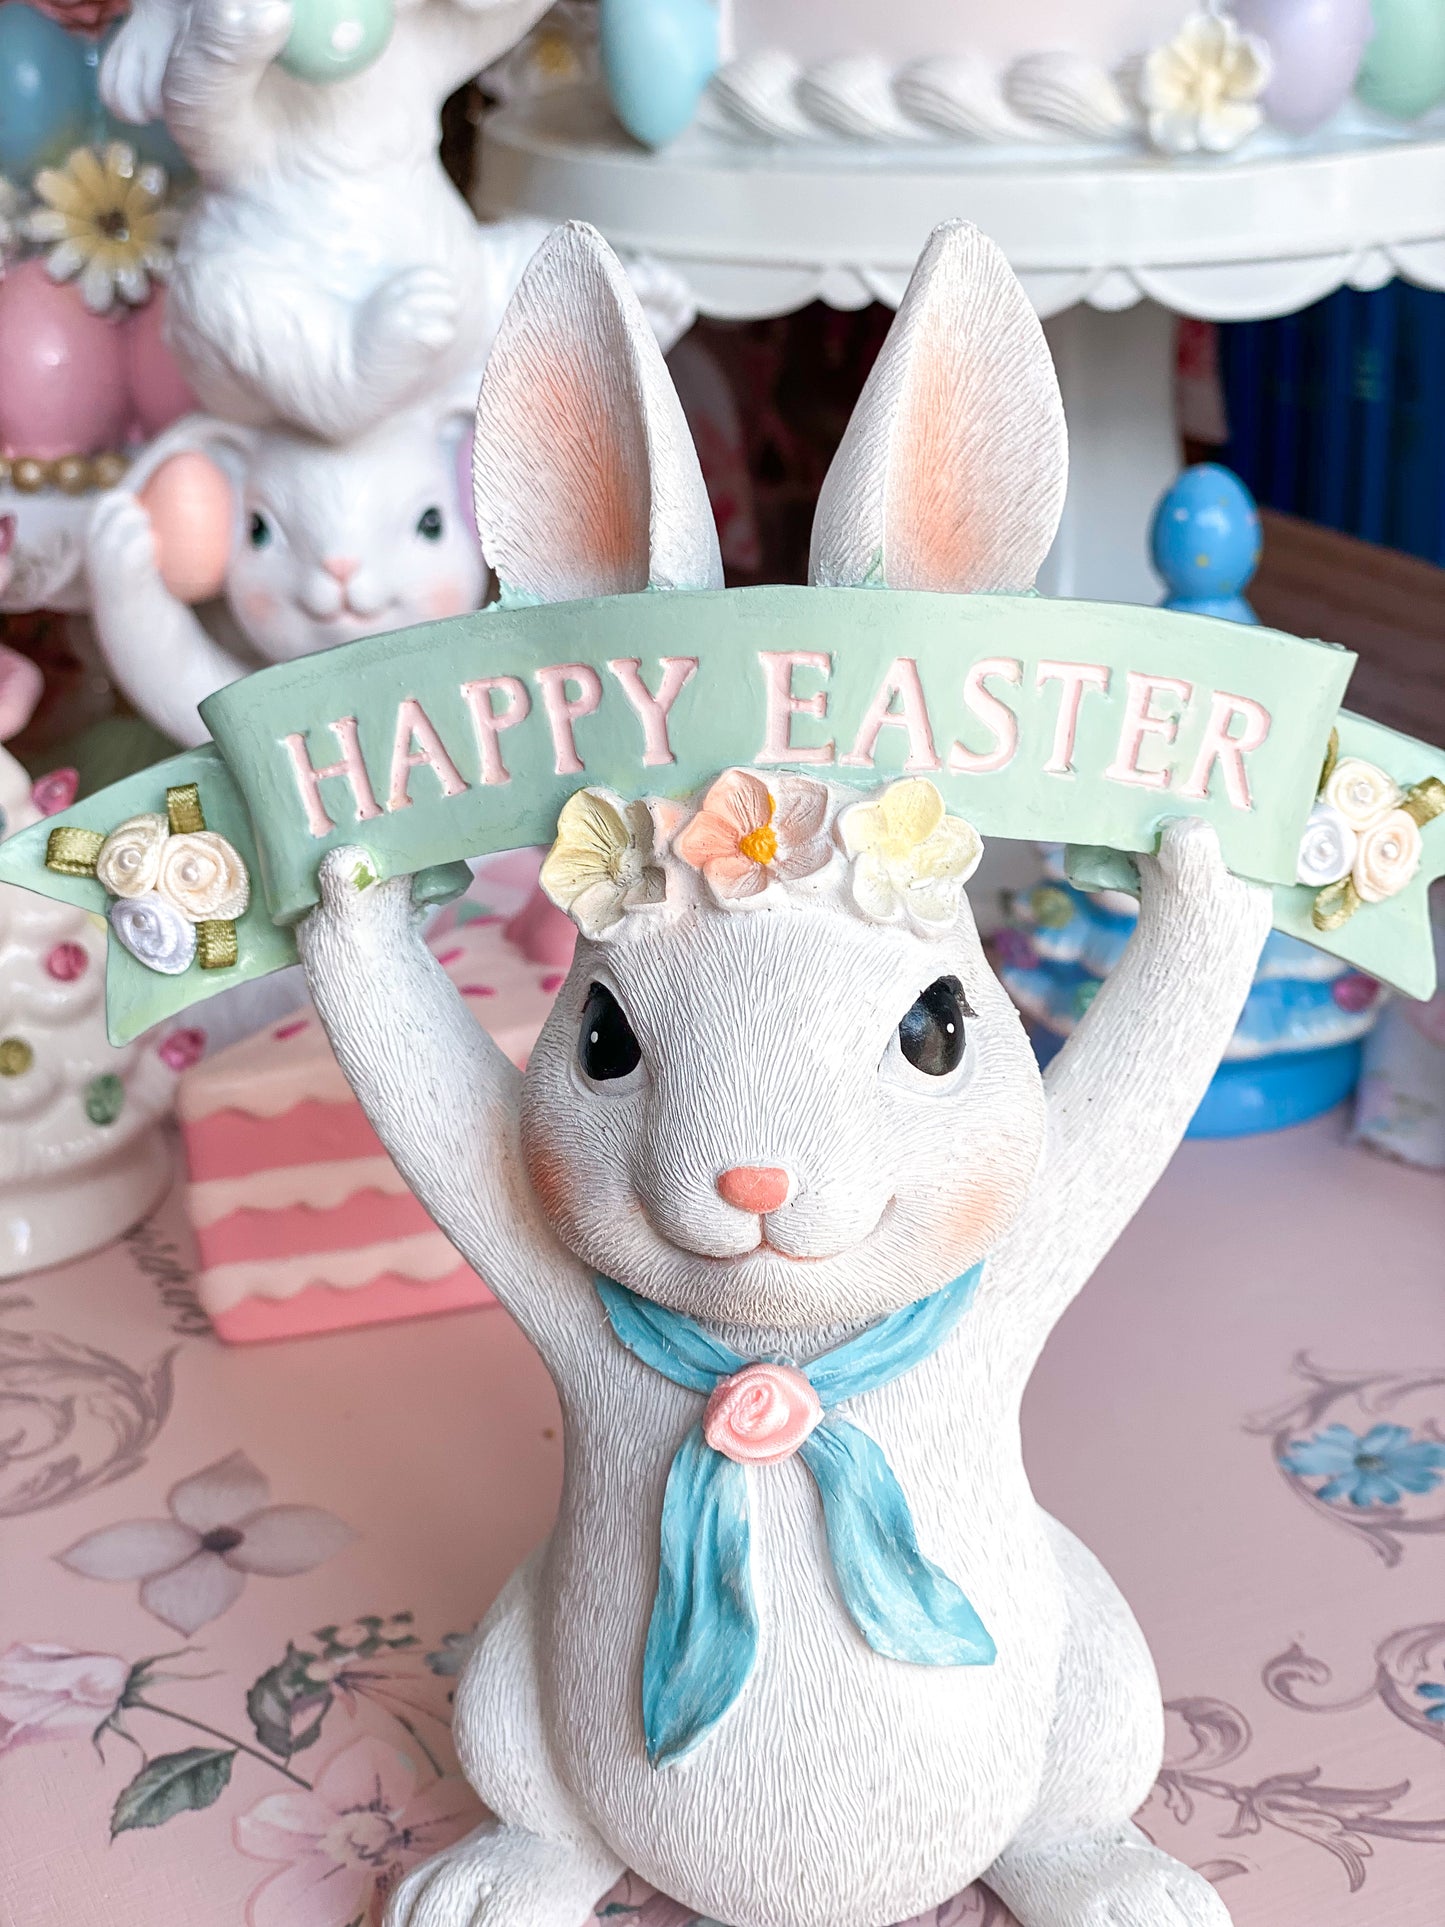 Bunnies Holding Happy Easter Signs